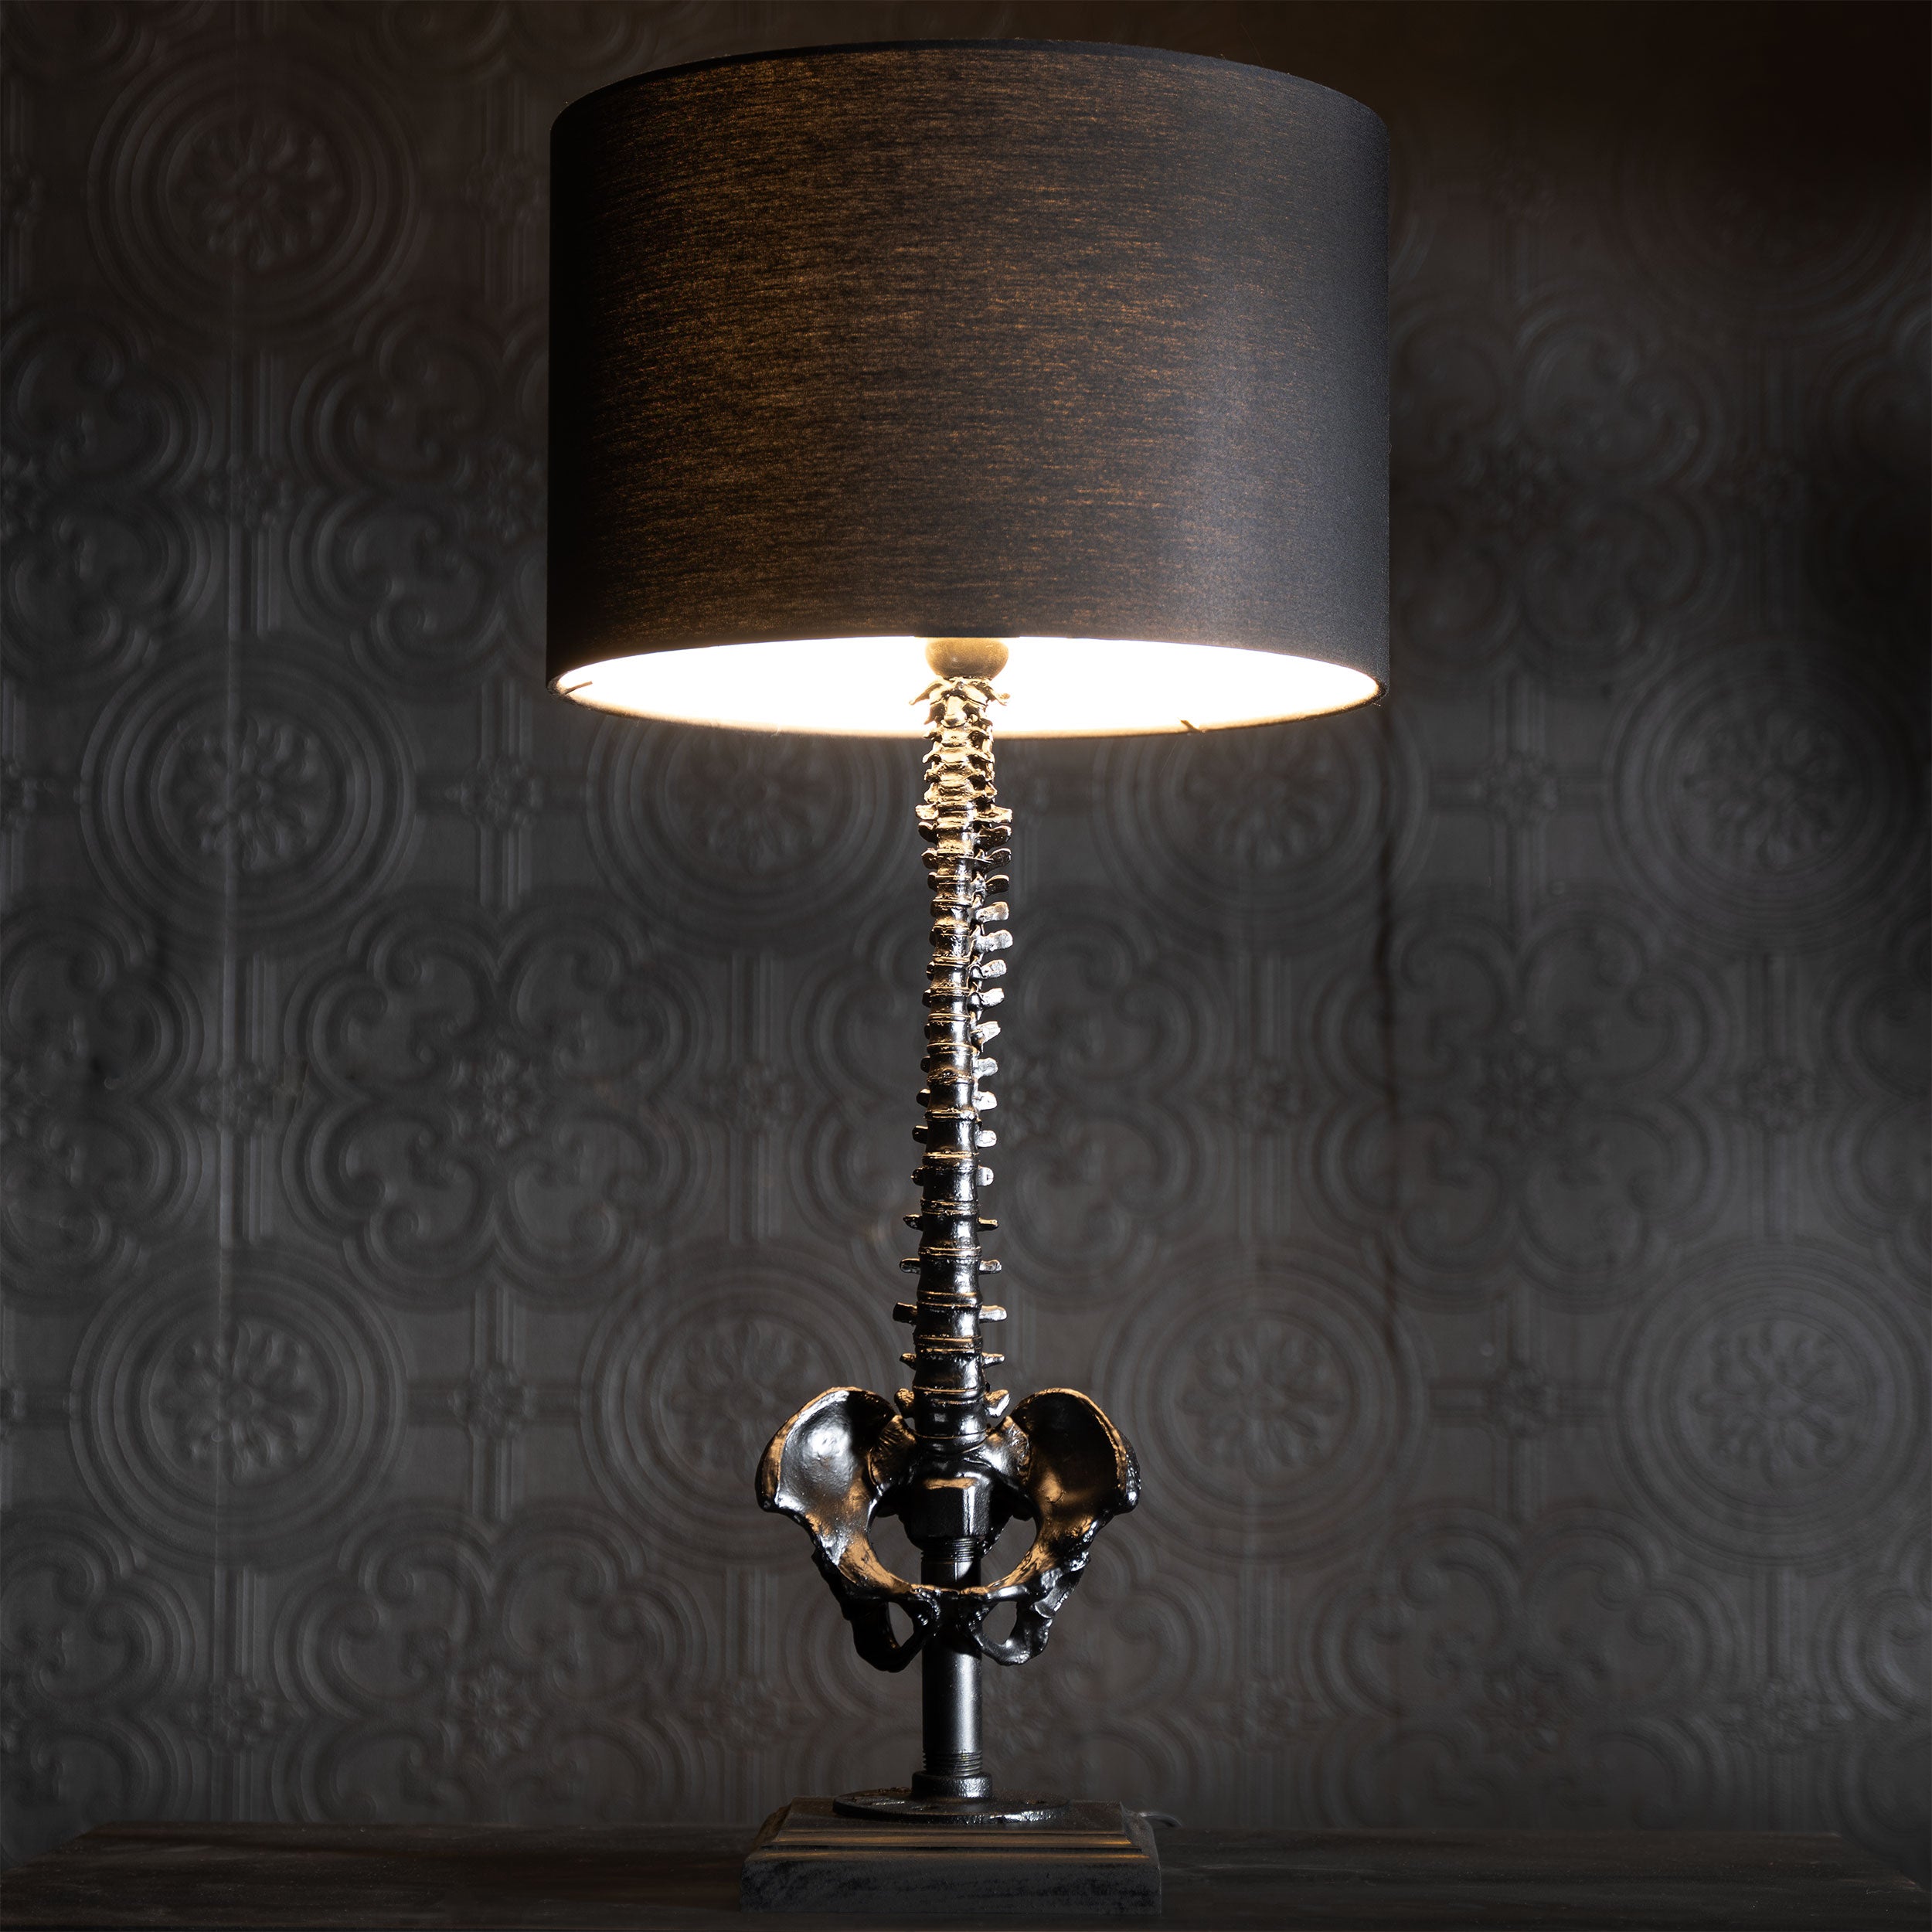 The Black Spine Lamp by The Blackened Teeth